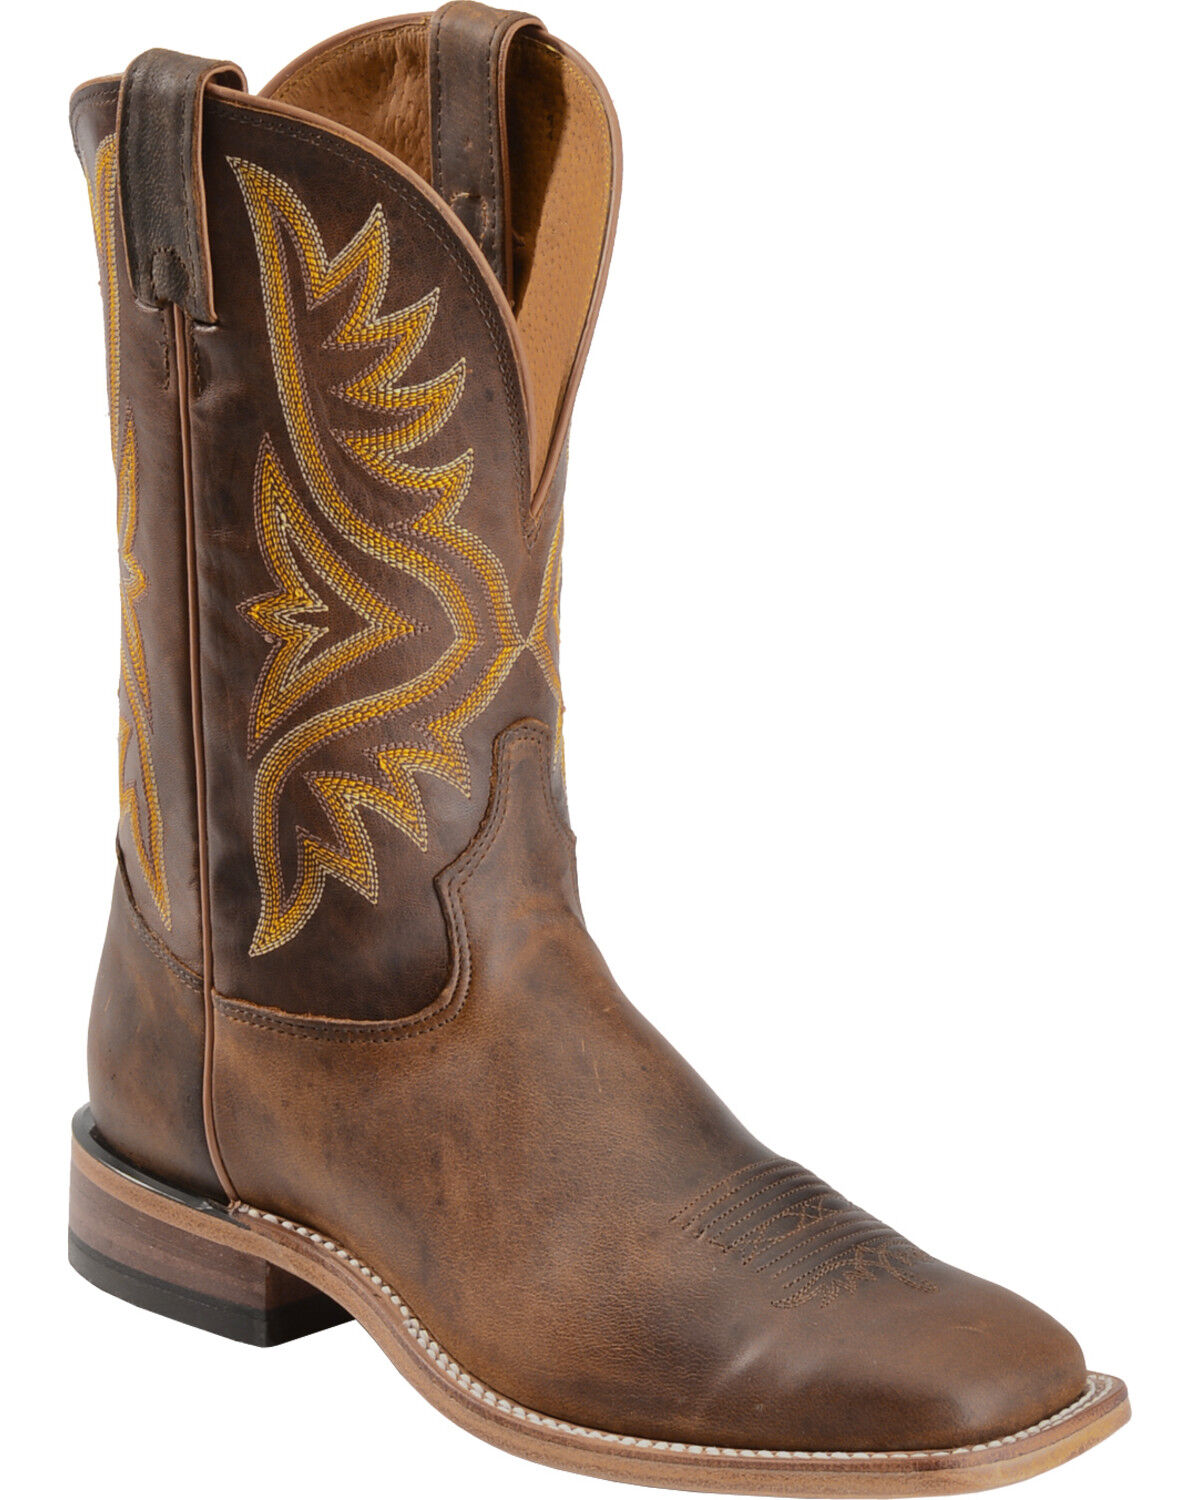 Men's Mcrae 11" Pull-On MR85184 Soft Toe Distressed Brown Western Cowboy Boot 